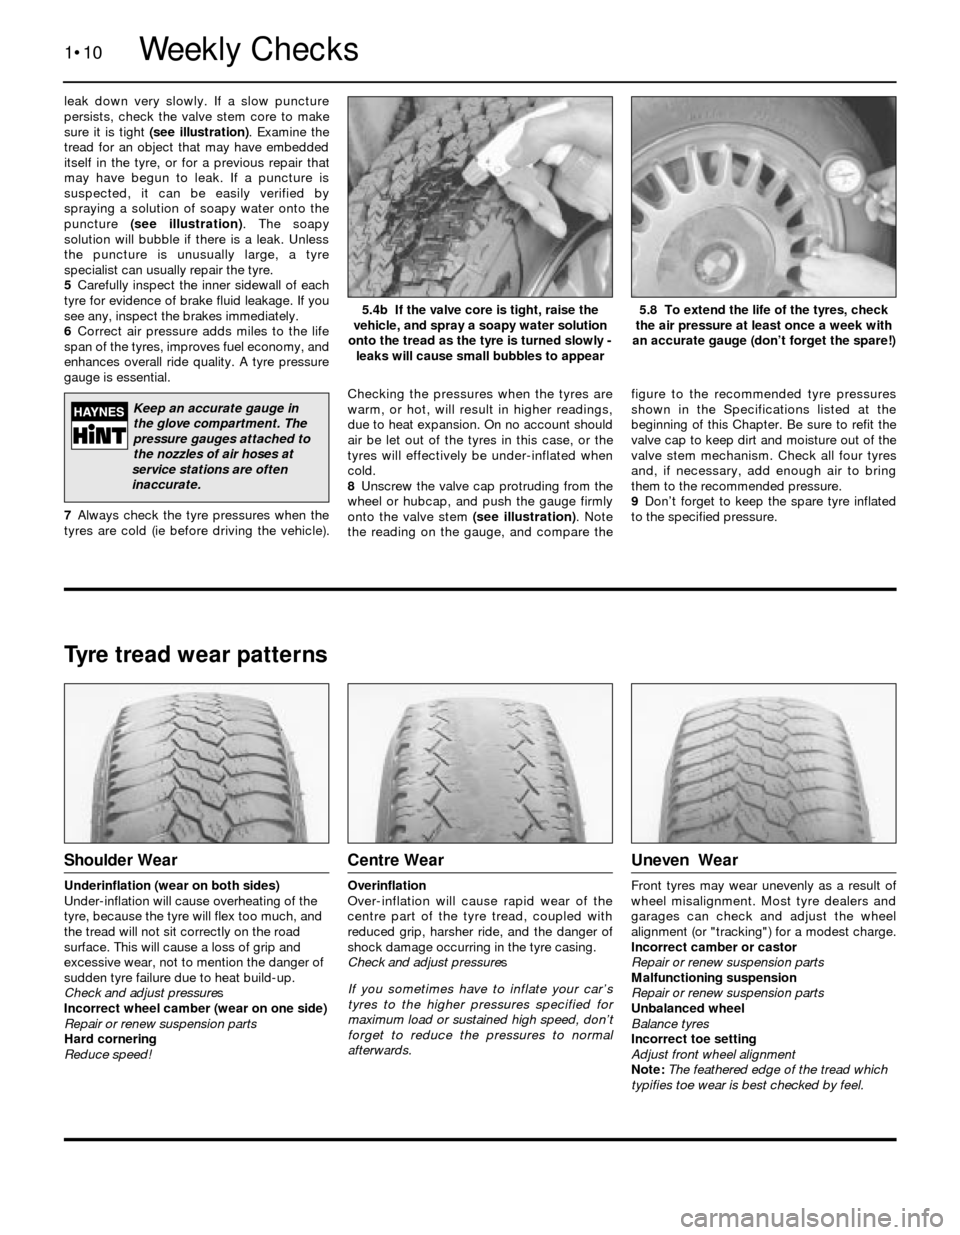 BMW 3 SERIES 1984 E30 Workshop Manual leak down very slowly. If a slow puncture
persists, check the valve stem core to make
sure it is tight (see illustration). Examine the
tread for an object that may have embedded
itself in the tyre, or